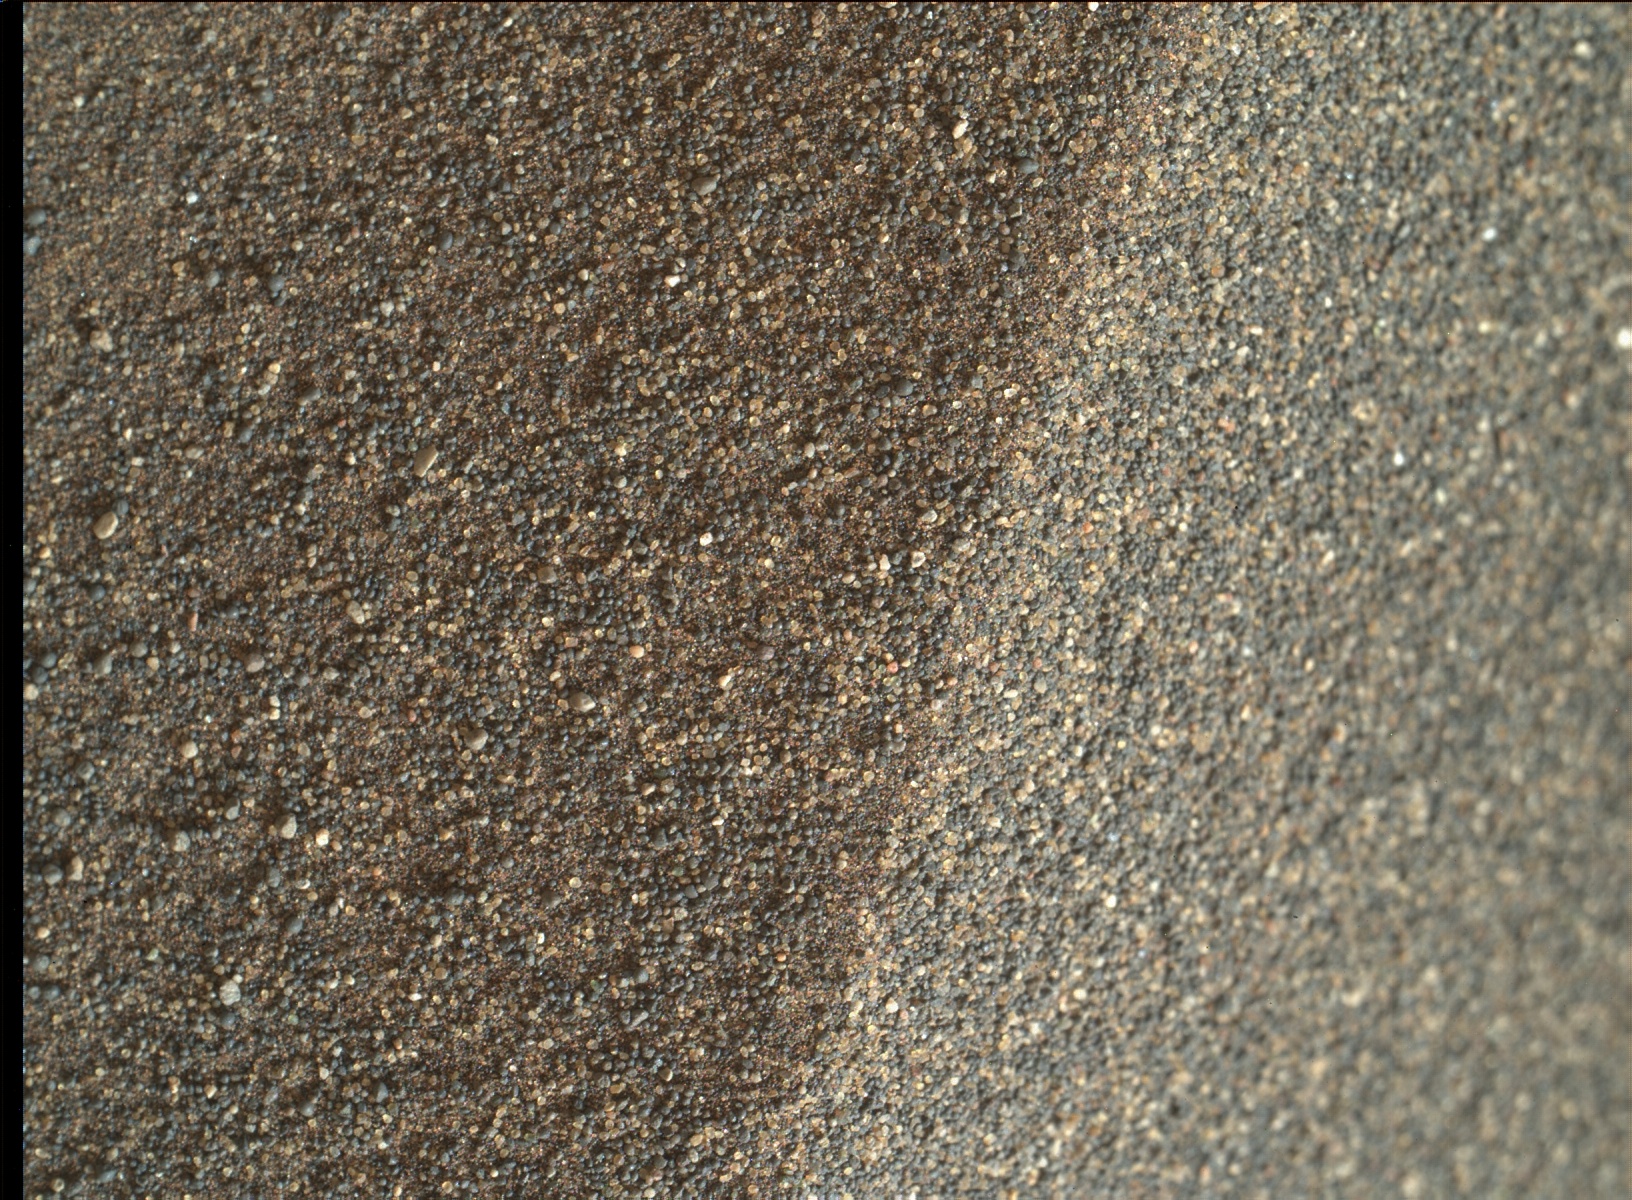 Nasa's Mars rover Curiosity acquired this image using its Mars Hand Lens Imager (MAHLI) on Sol 1637